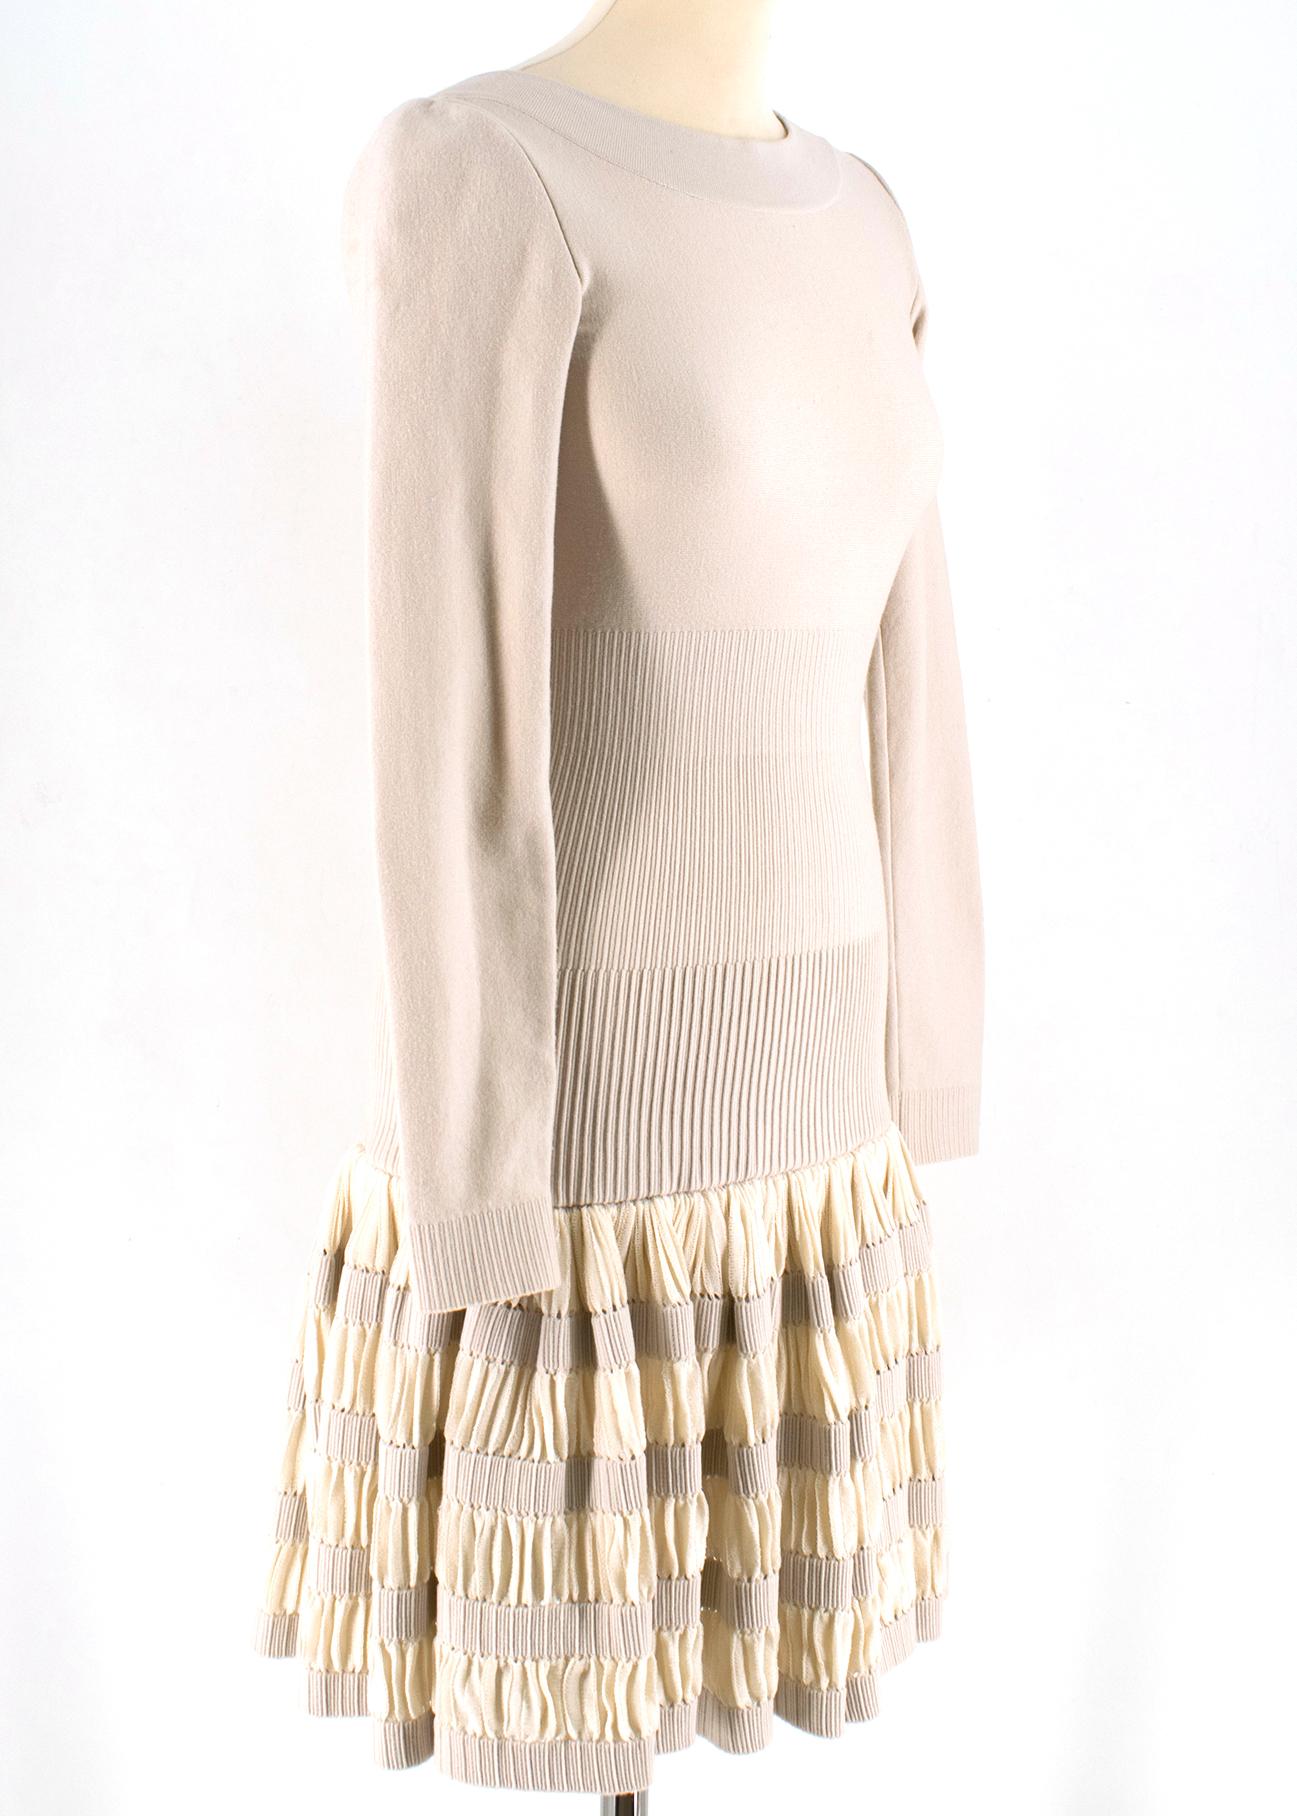 Alaia Beige Wool blend Knit Dress

- beige wool blend dress
- boat neckline
- v back
- unlined
- zip fastening to the back
- pleated base
- above the knee length 

Please note, these items are pre-owned and may show some signs of storage, even when